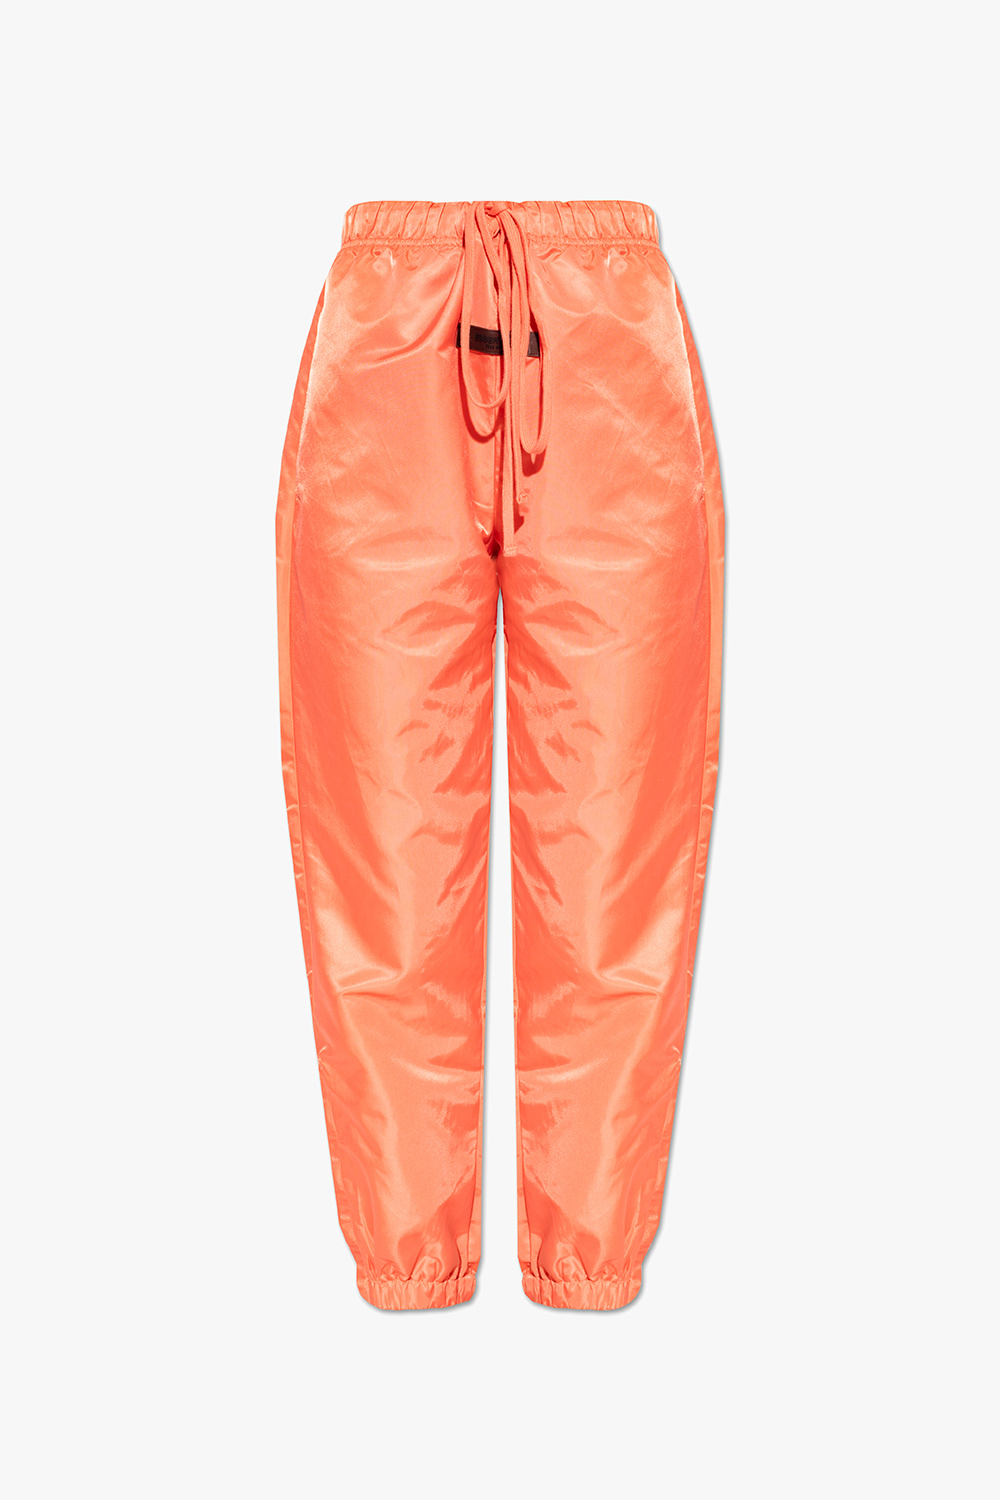 Fear Of God Essentials Track pants with logo, Women's Clothing